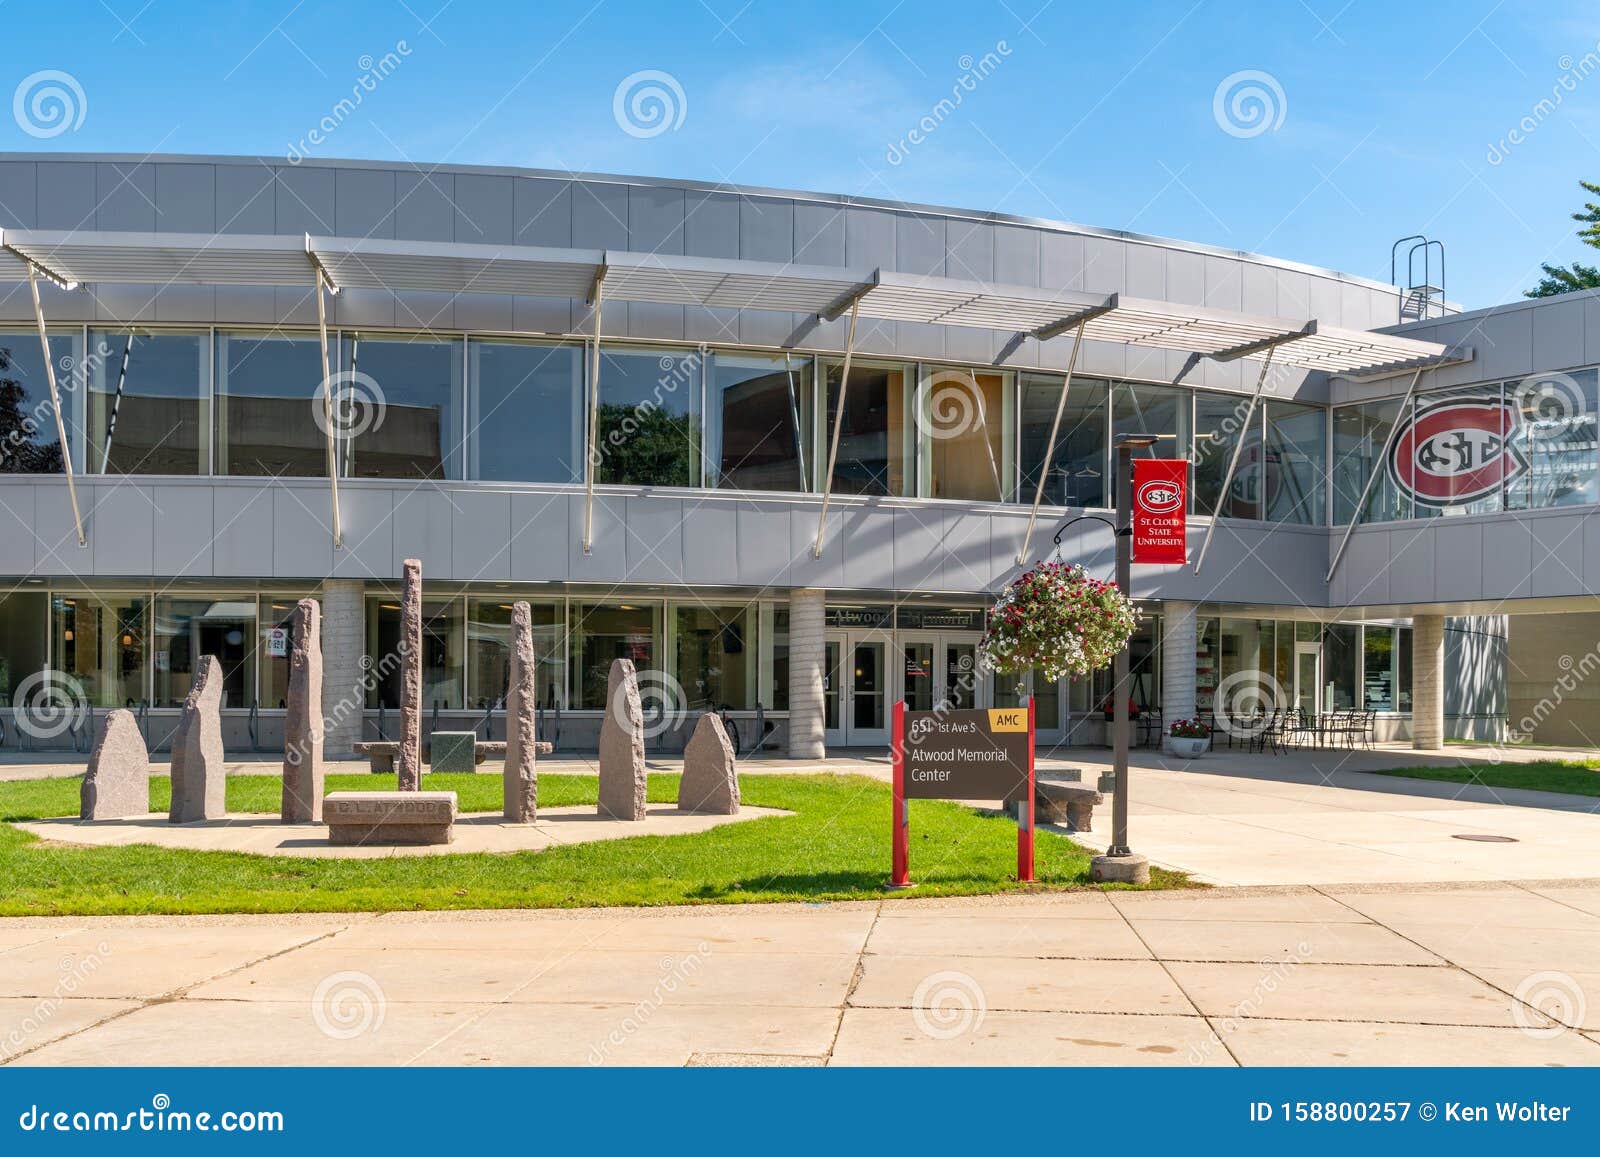 St Cloud State University Photos - Free & Royalty-Free Stock Photos from  Dreamstime